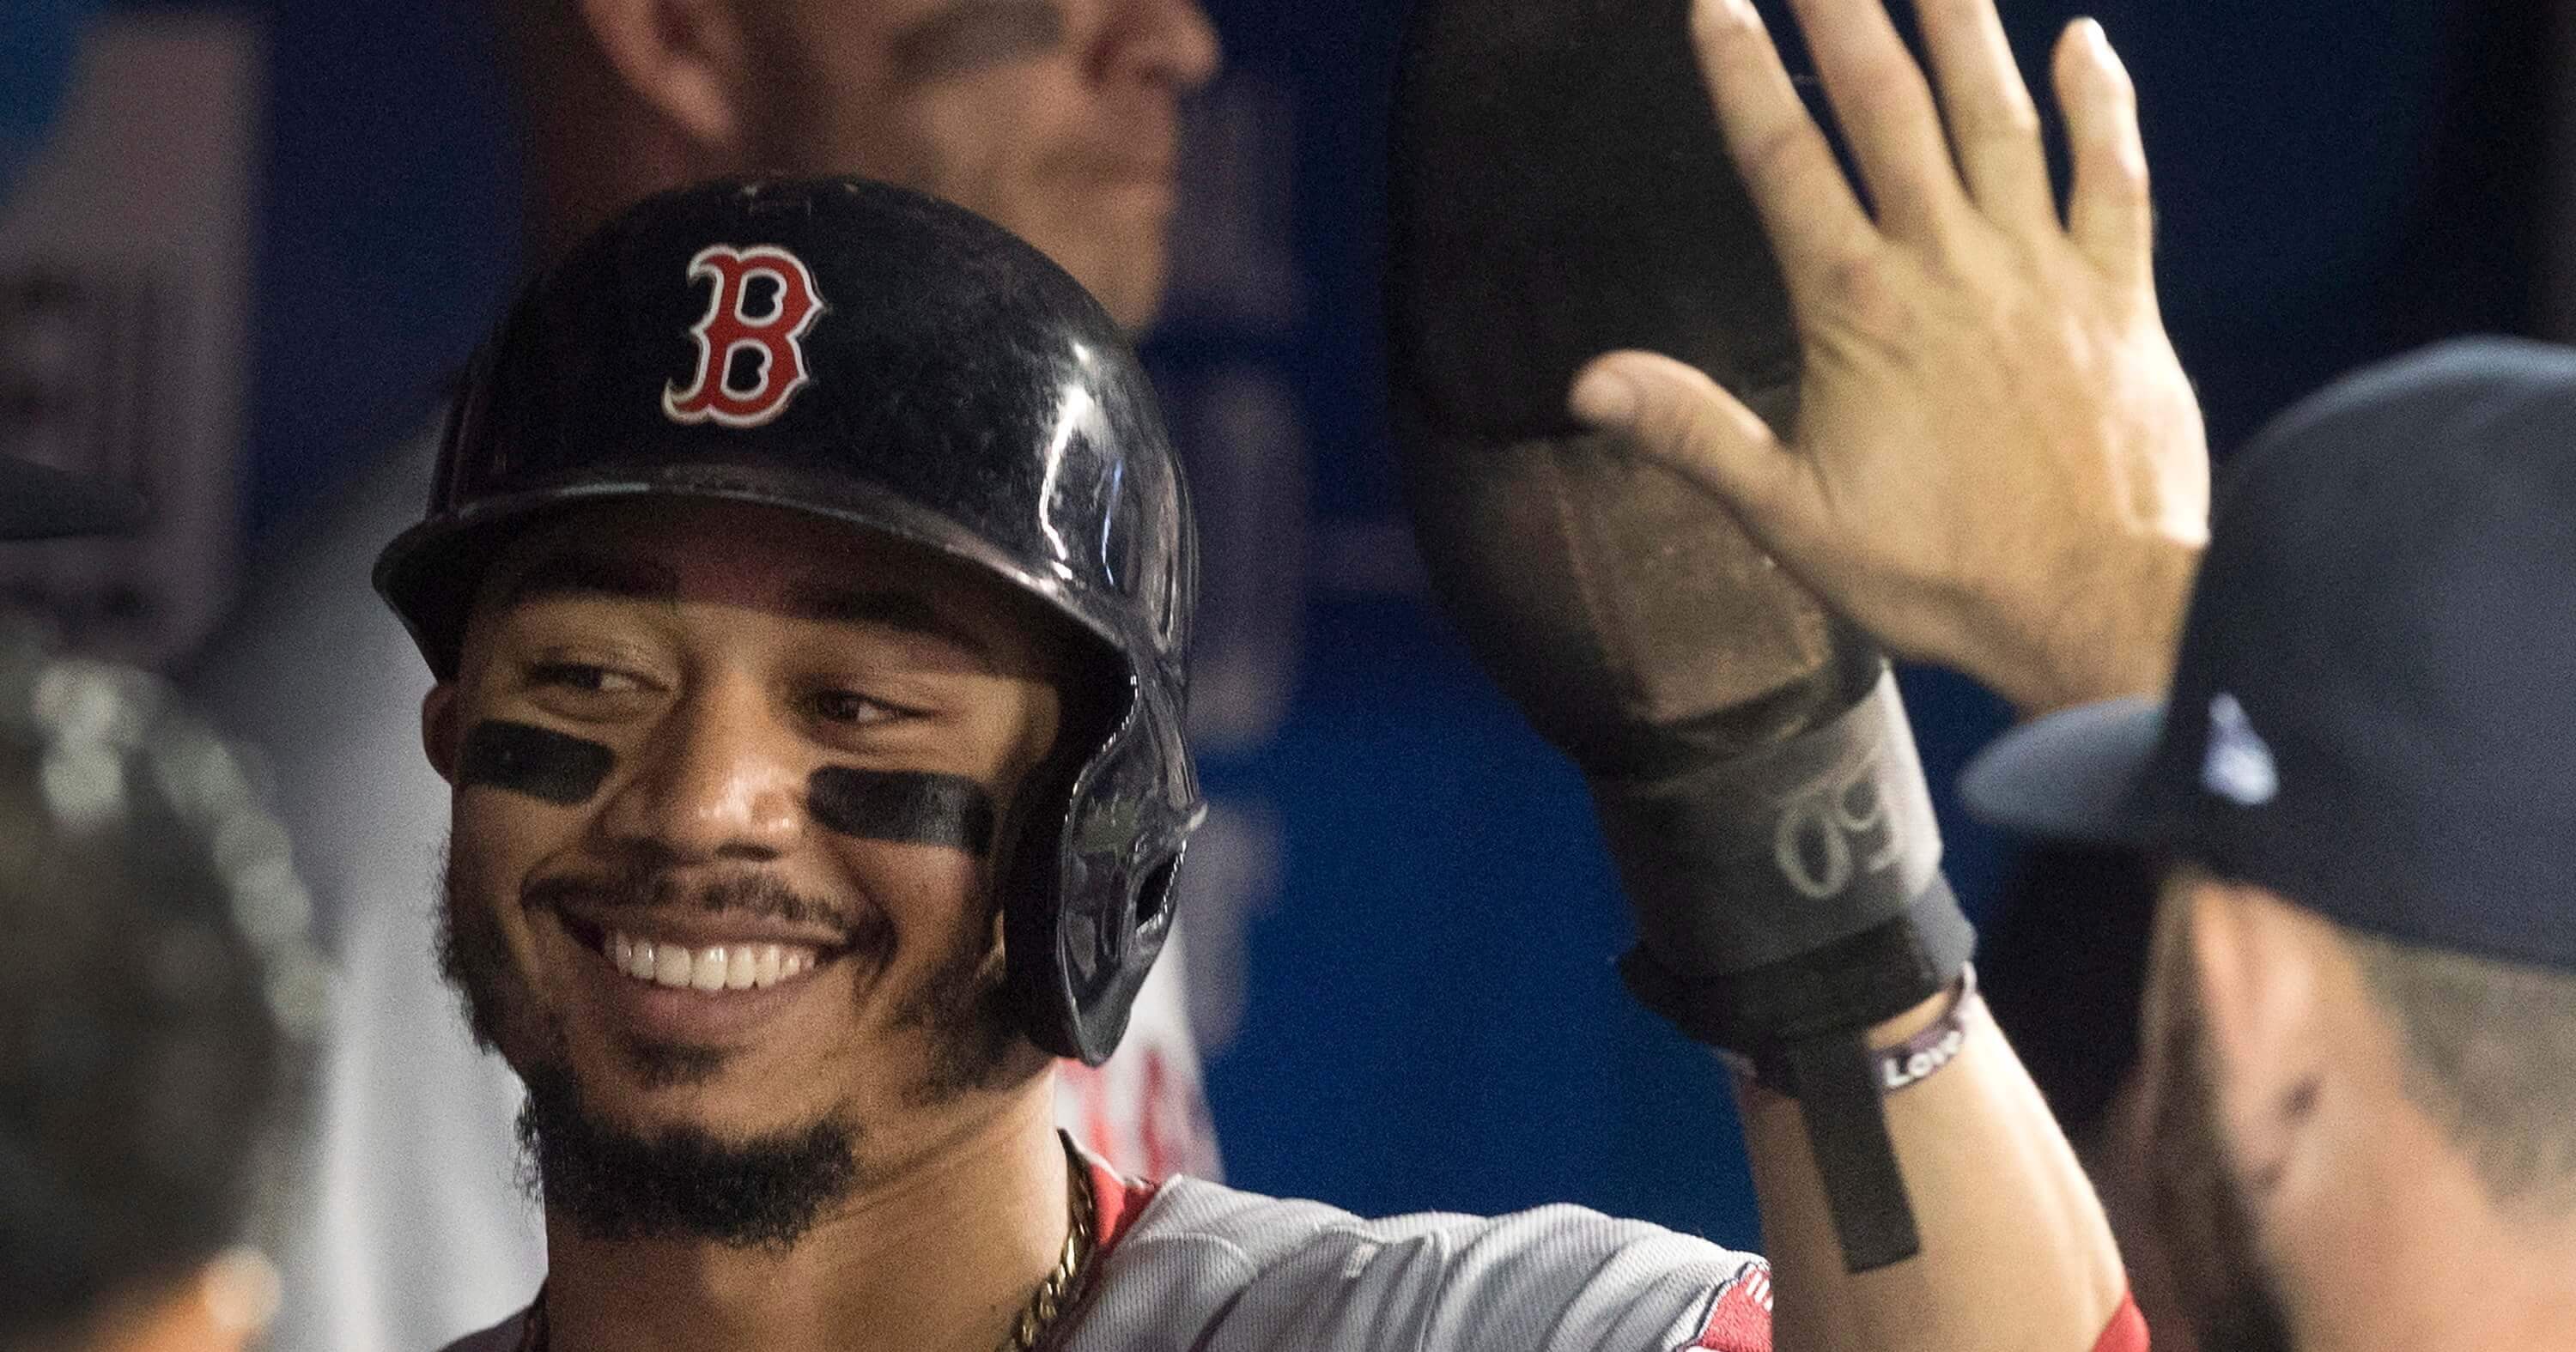 Boston Red Sox's Mookie Betts is congratulated in the dugout after scoring against the Toronto Blue Jays during the first inning of a baseball game Thursday, Aug. 9, 2018, in Toronto.